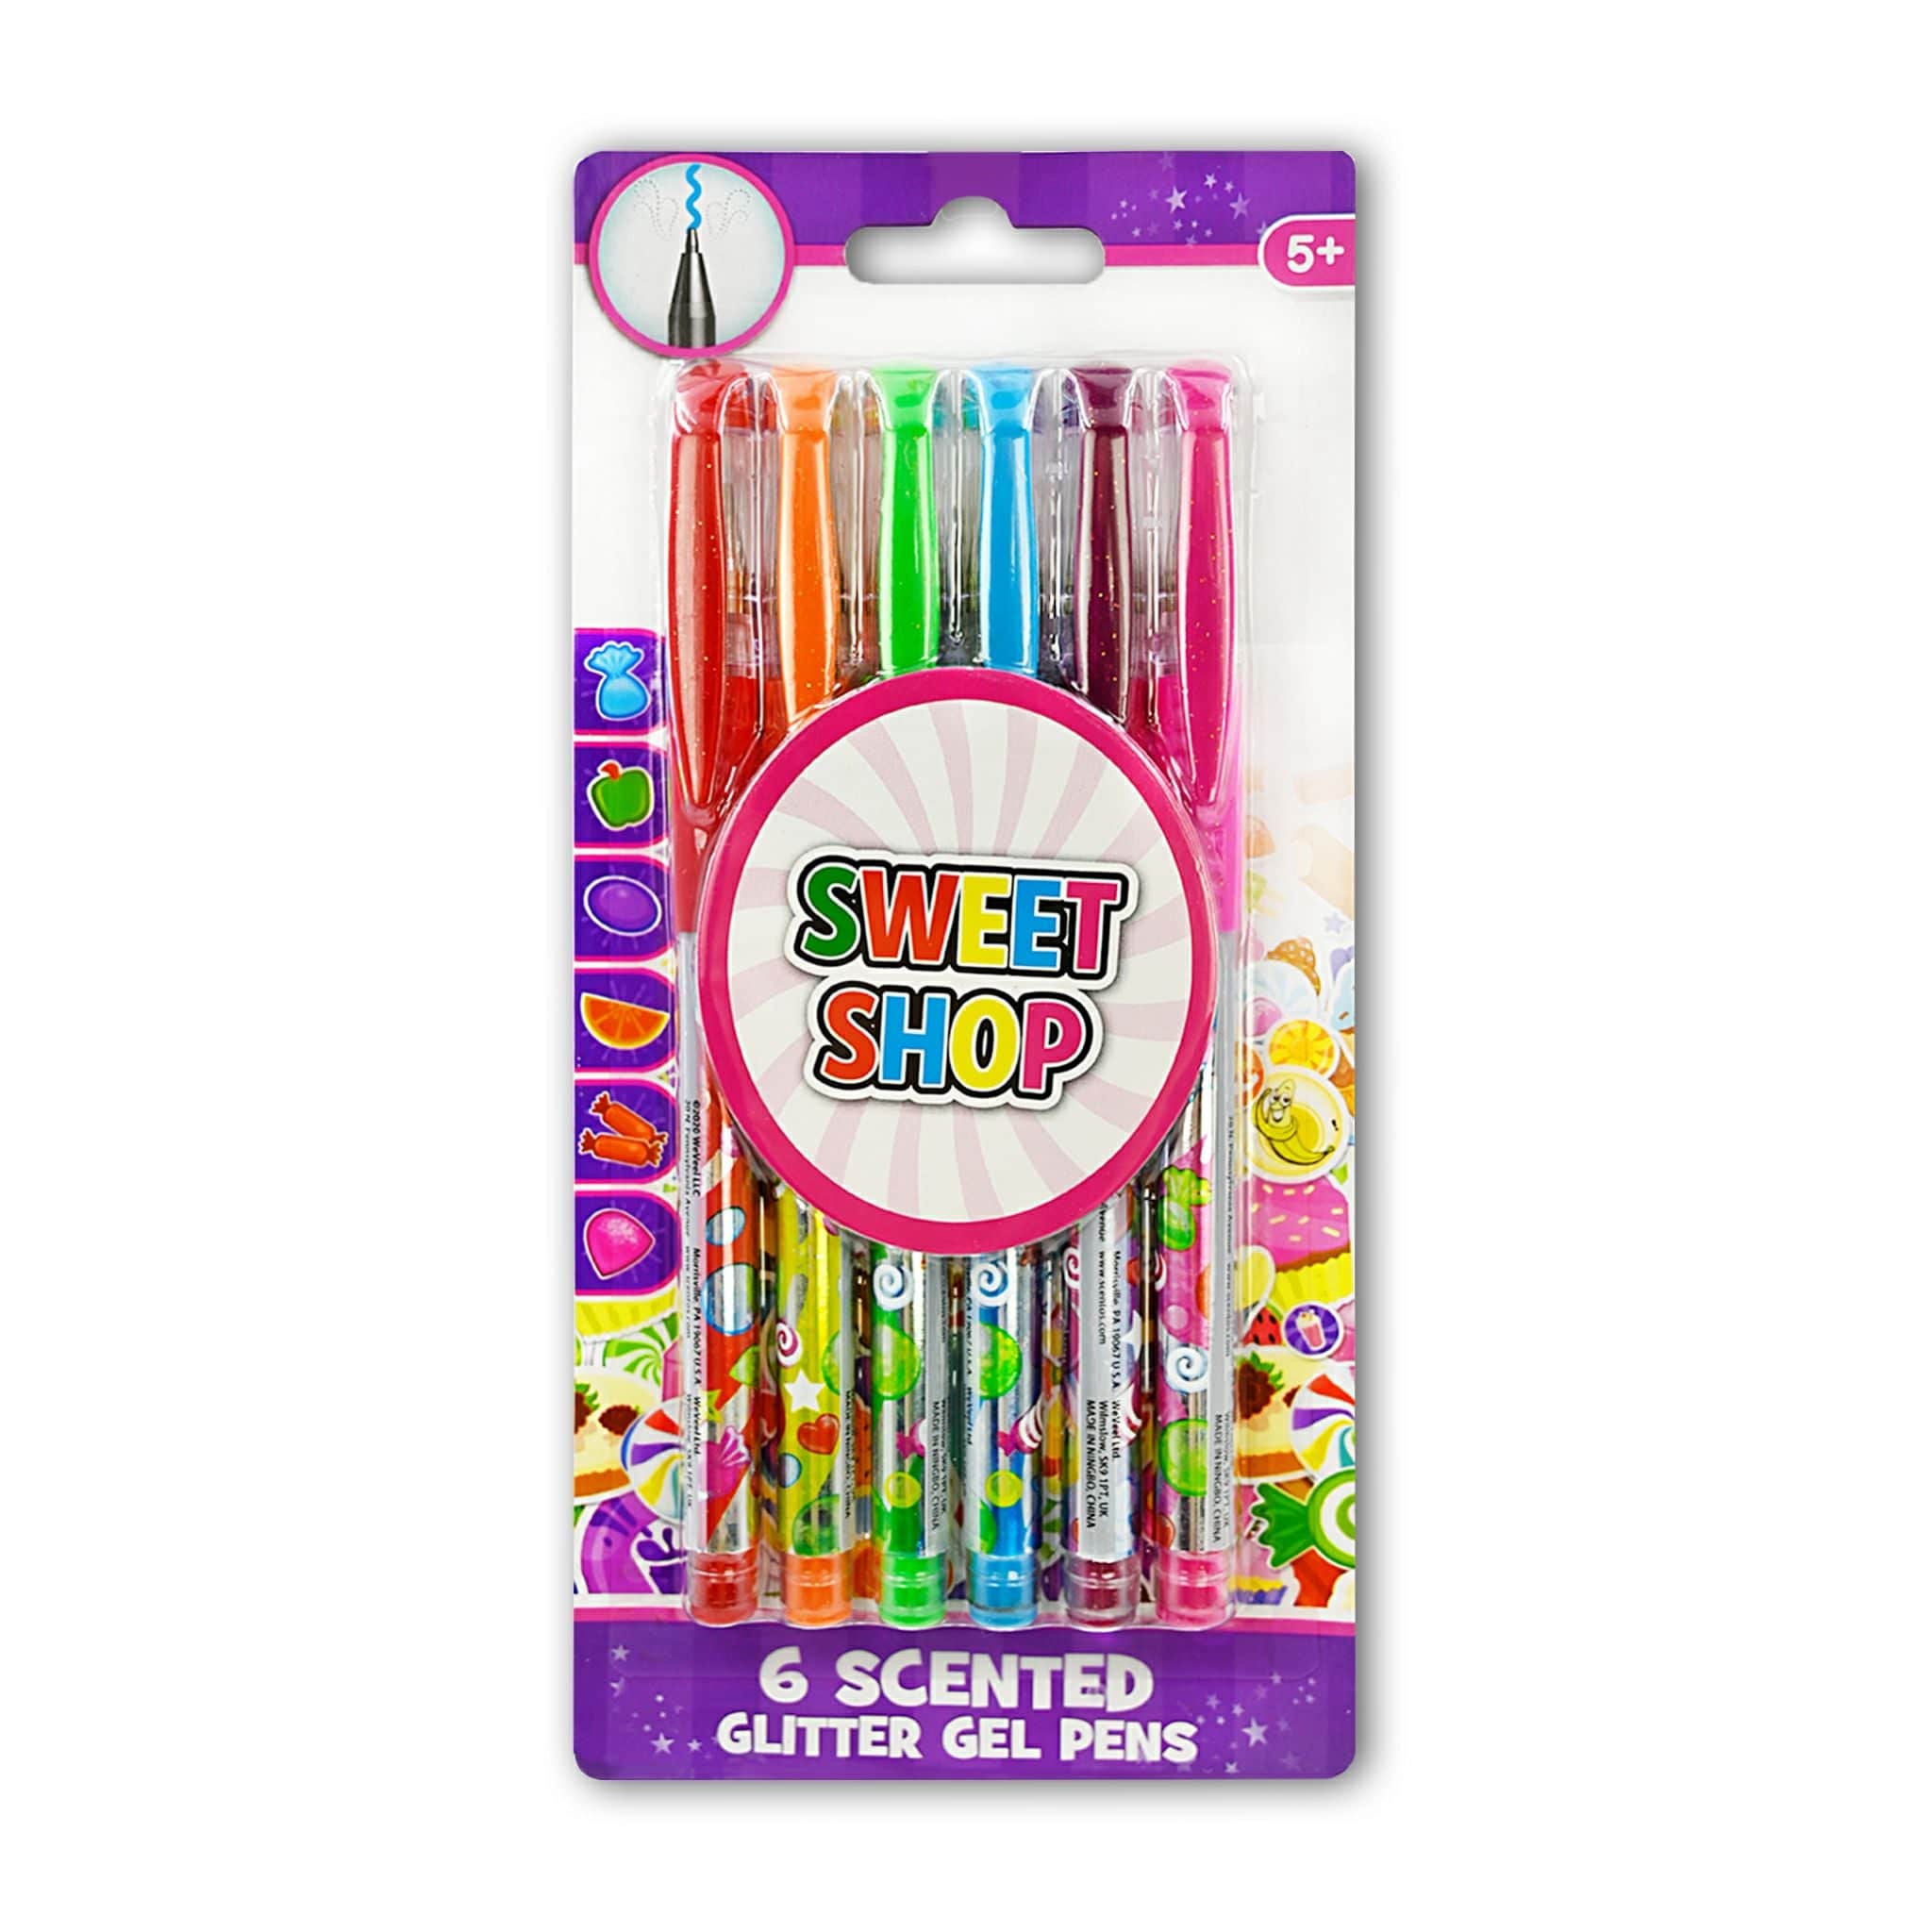 Scentos Scented Gel Pens for Kids - Assorted Colorful Pens - Fine Point Gel  Pen Set - For Ages 3 and Up - 5 Count (Glitter)